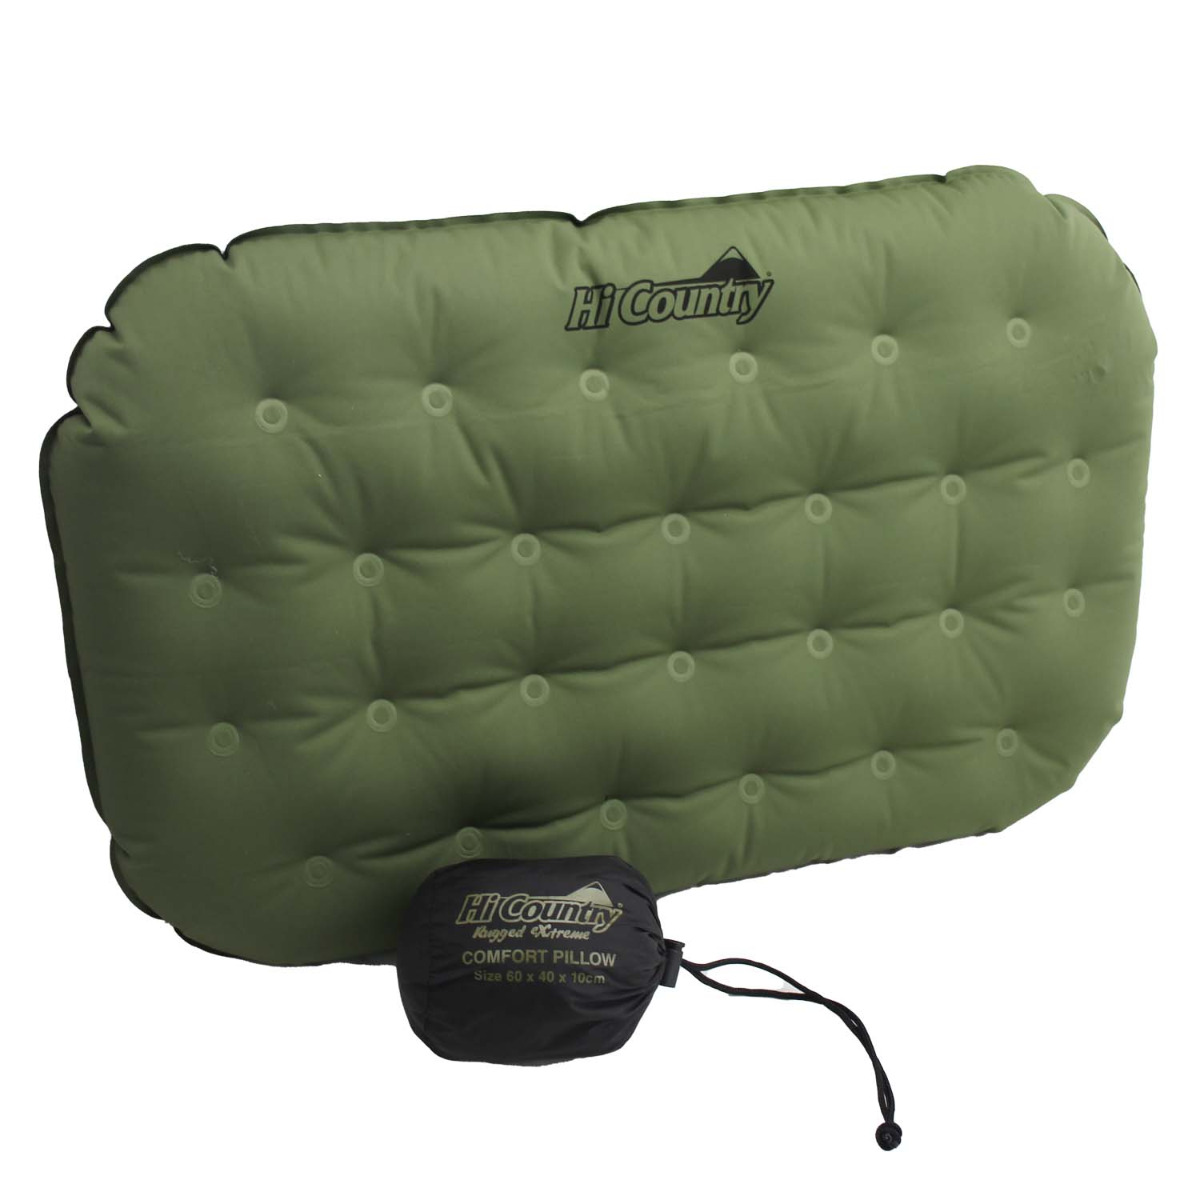 HI-COUNTRY RUGGED EXTREME COMFORT PILLOW